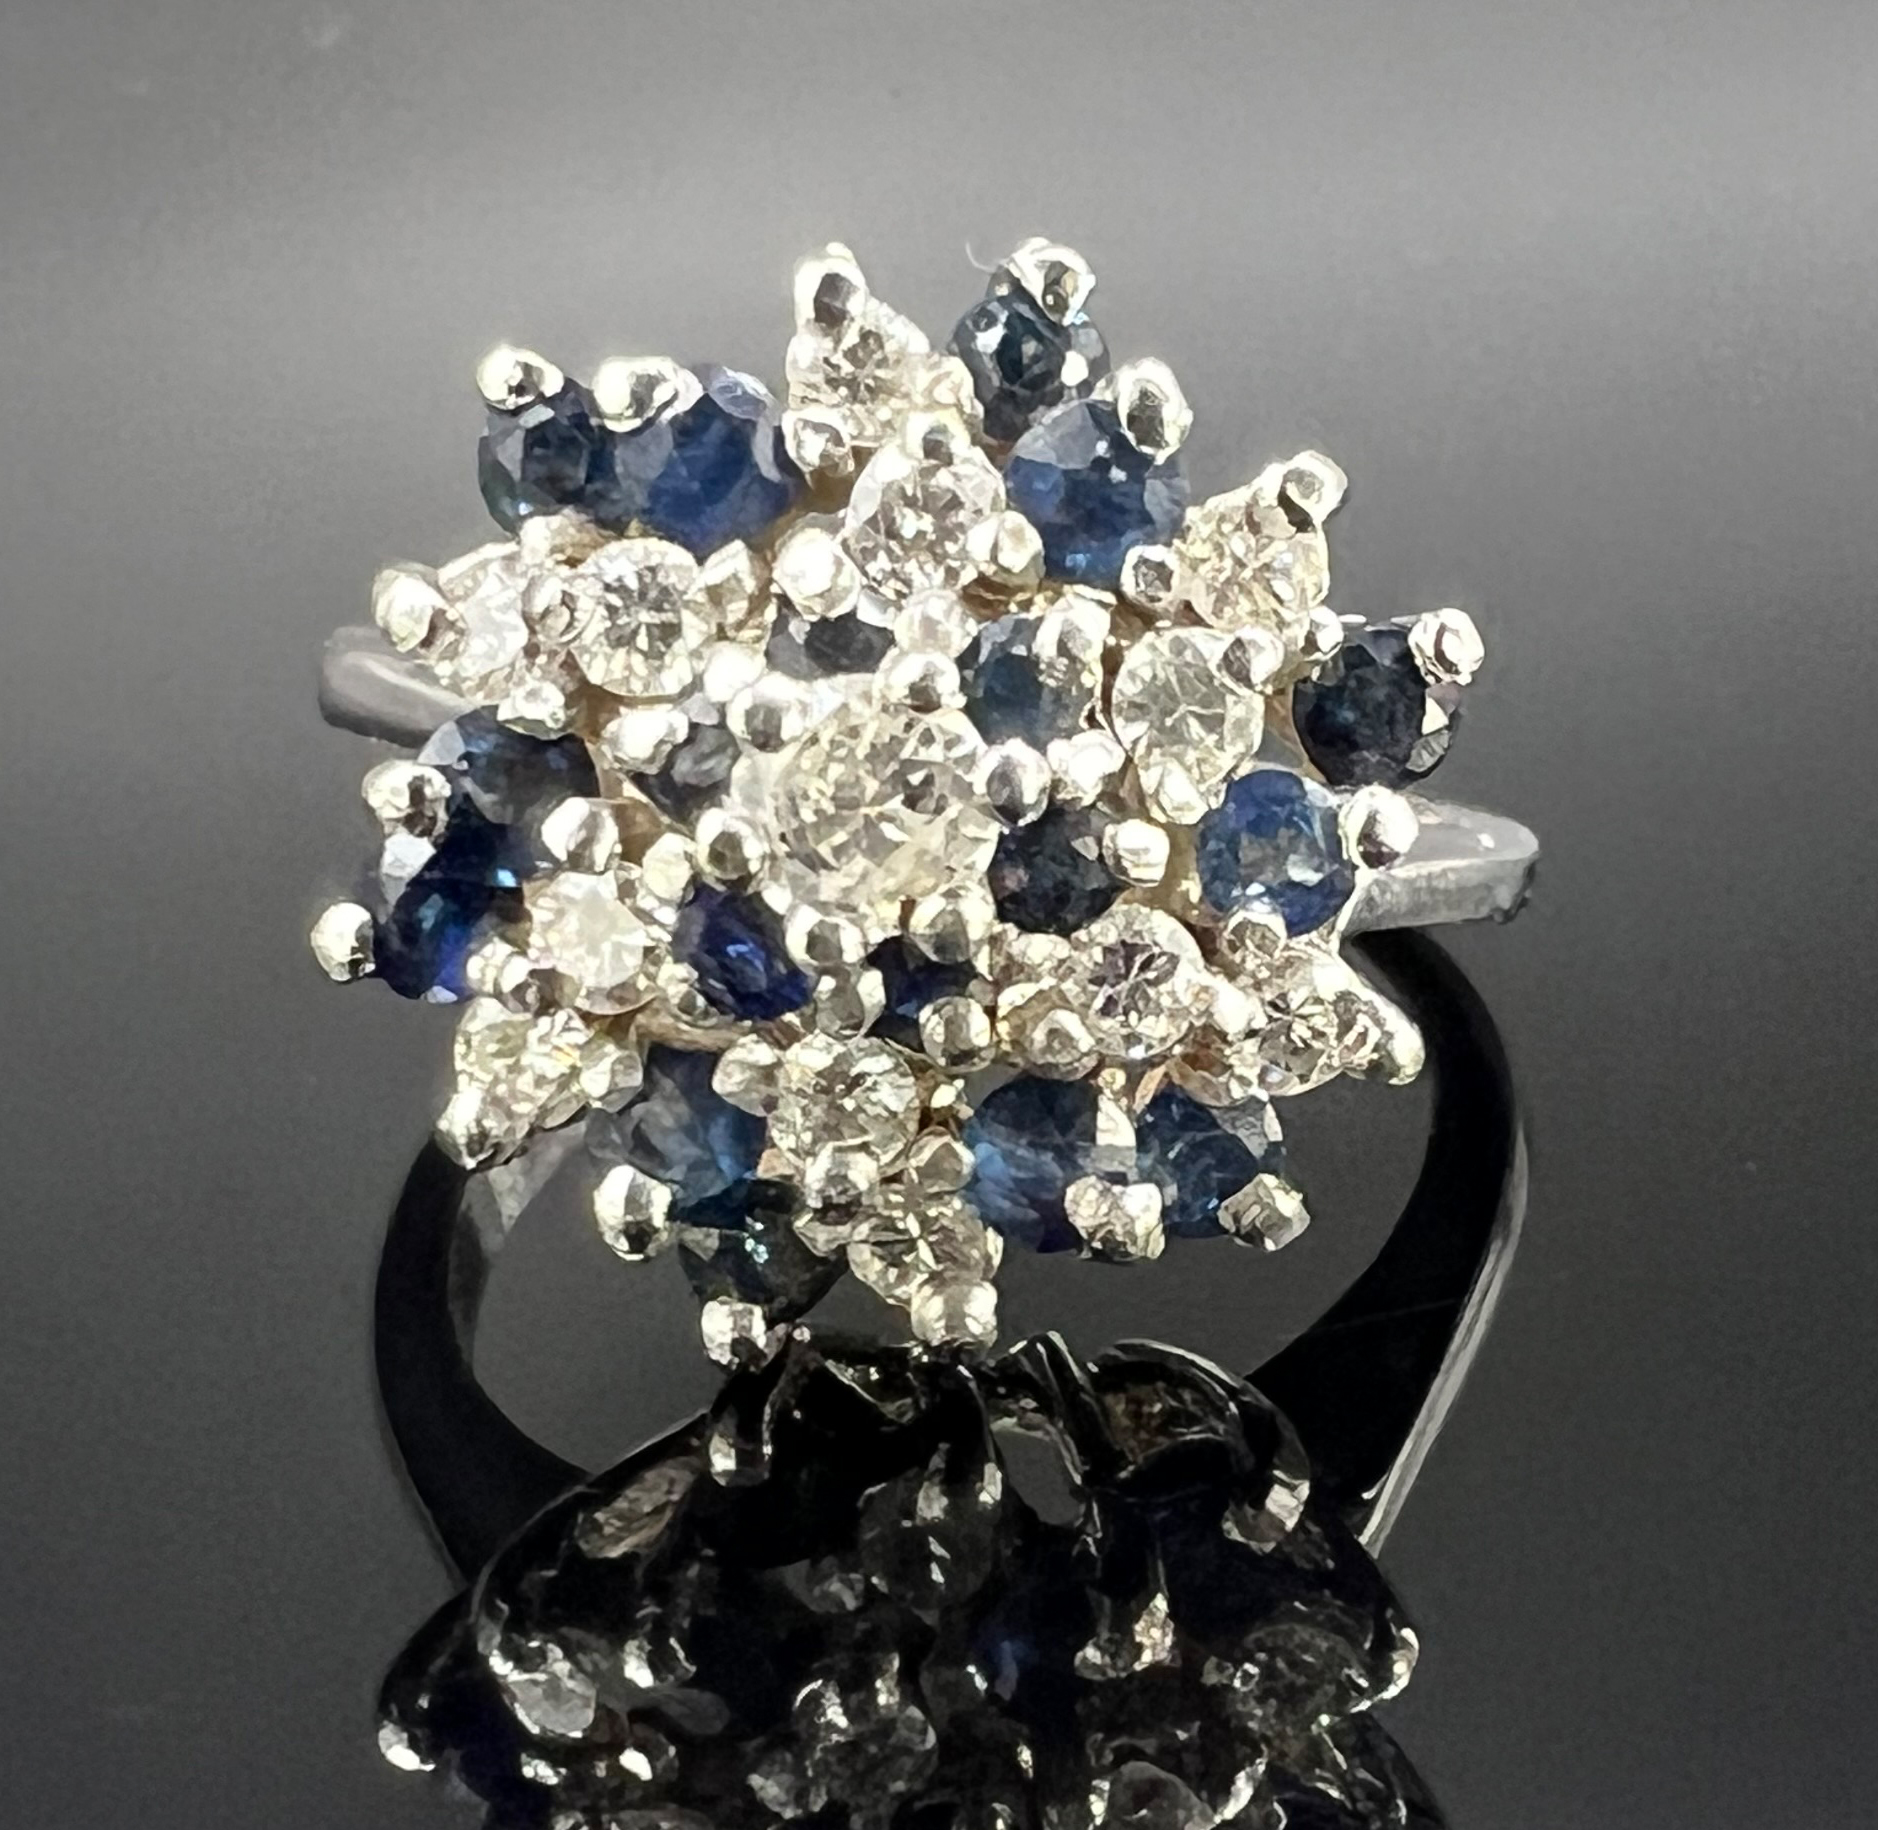 Ladies' ring. 585 white gold with diamonds and sapphires. - Image 2 of 7